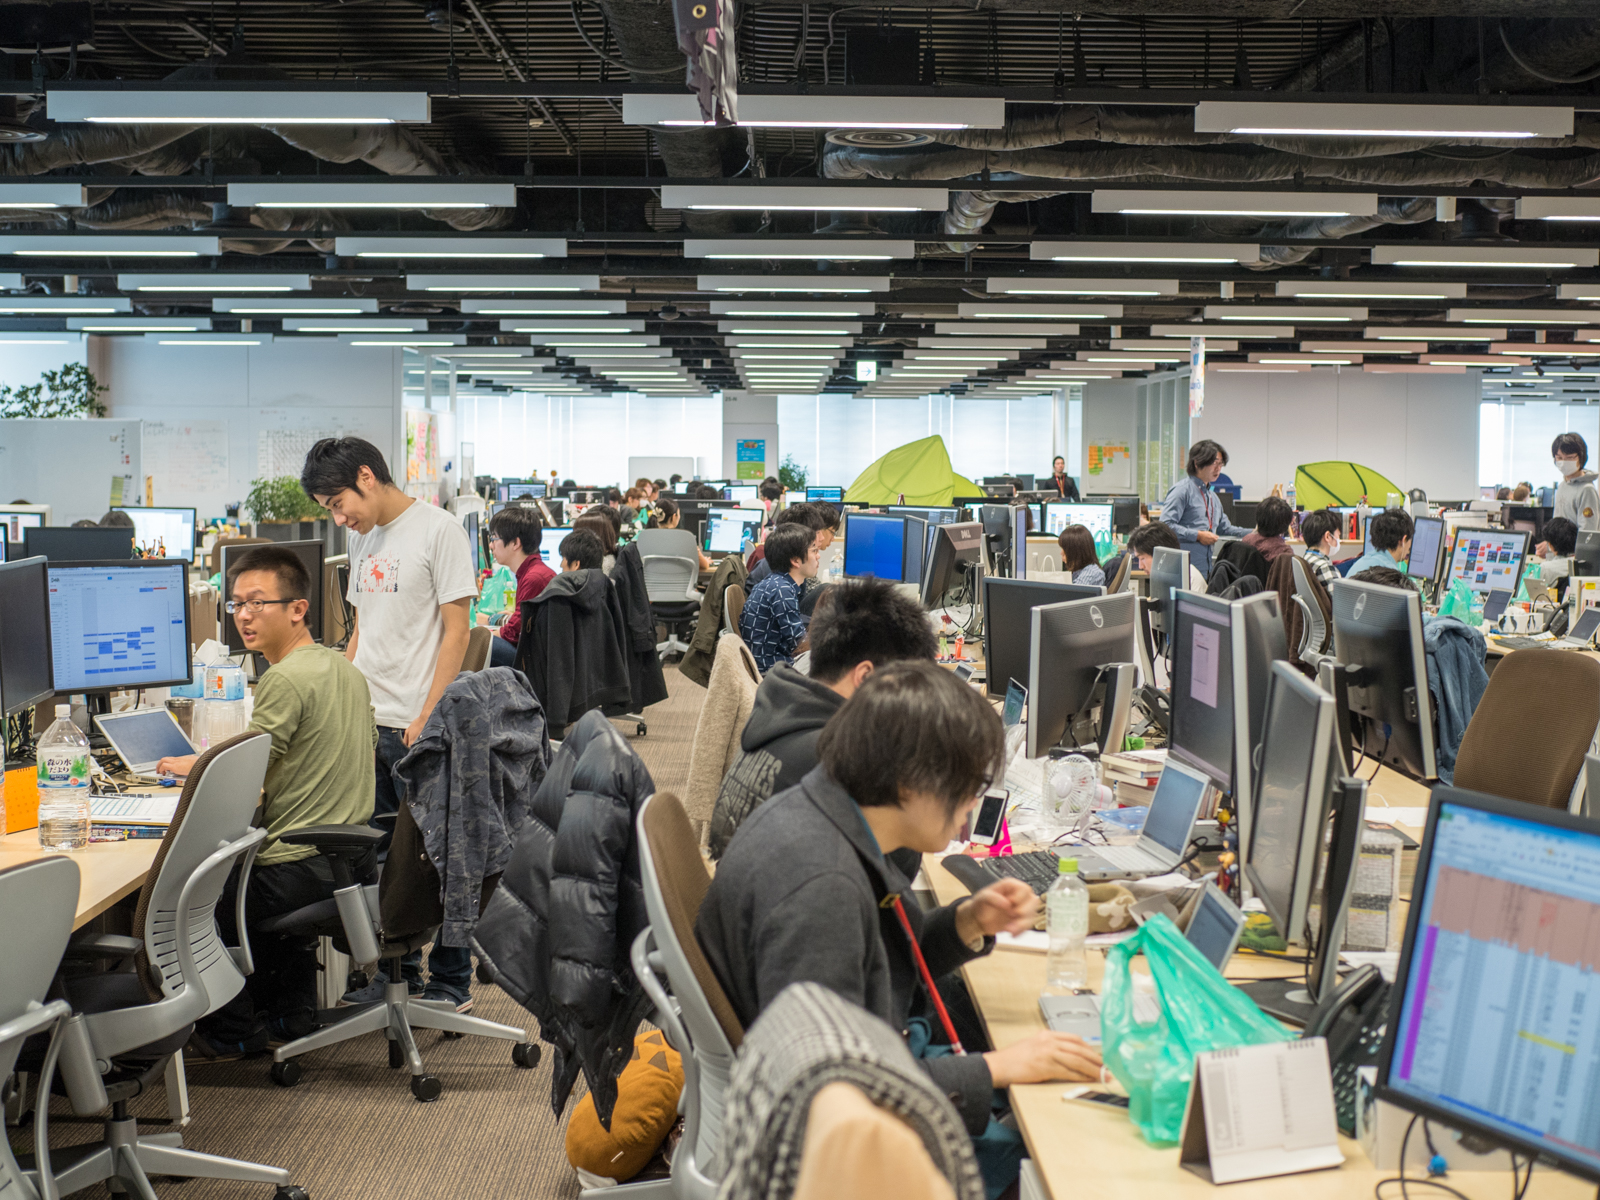 One of the work floors of the DeNA Tokyo headquarters, where employees work on games.